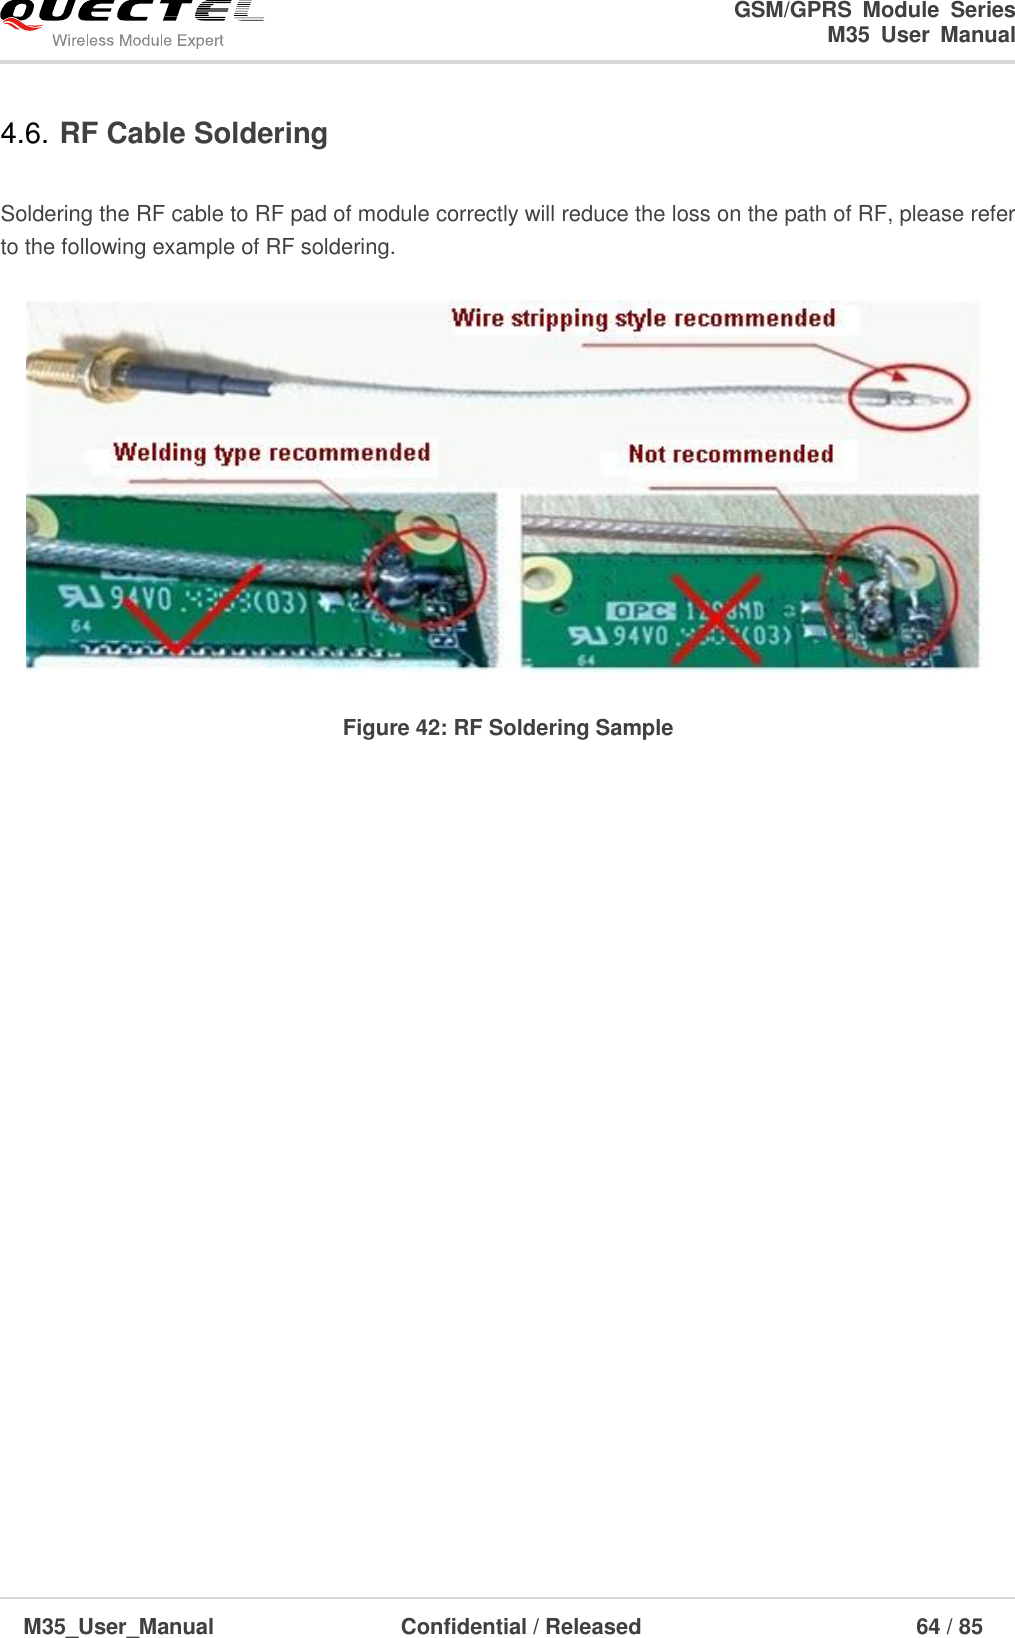                                                                              GSM/GPRS  Module  Series                                                                 M35  User  Manual  M35_User_Manual                                  Confidential / Released                             64 / 85    4.6. RF Cable Soldering  Soldering the RF cable to RF pad of module correctly will reduce the loss on the path of RF, please refer to the following example of RF soldering.  Figure 42: RF Soldering Sample    